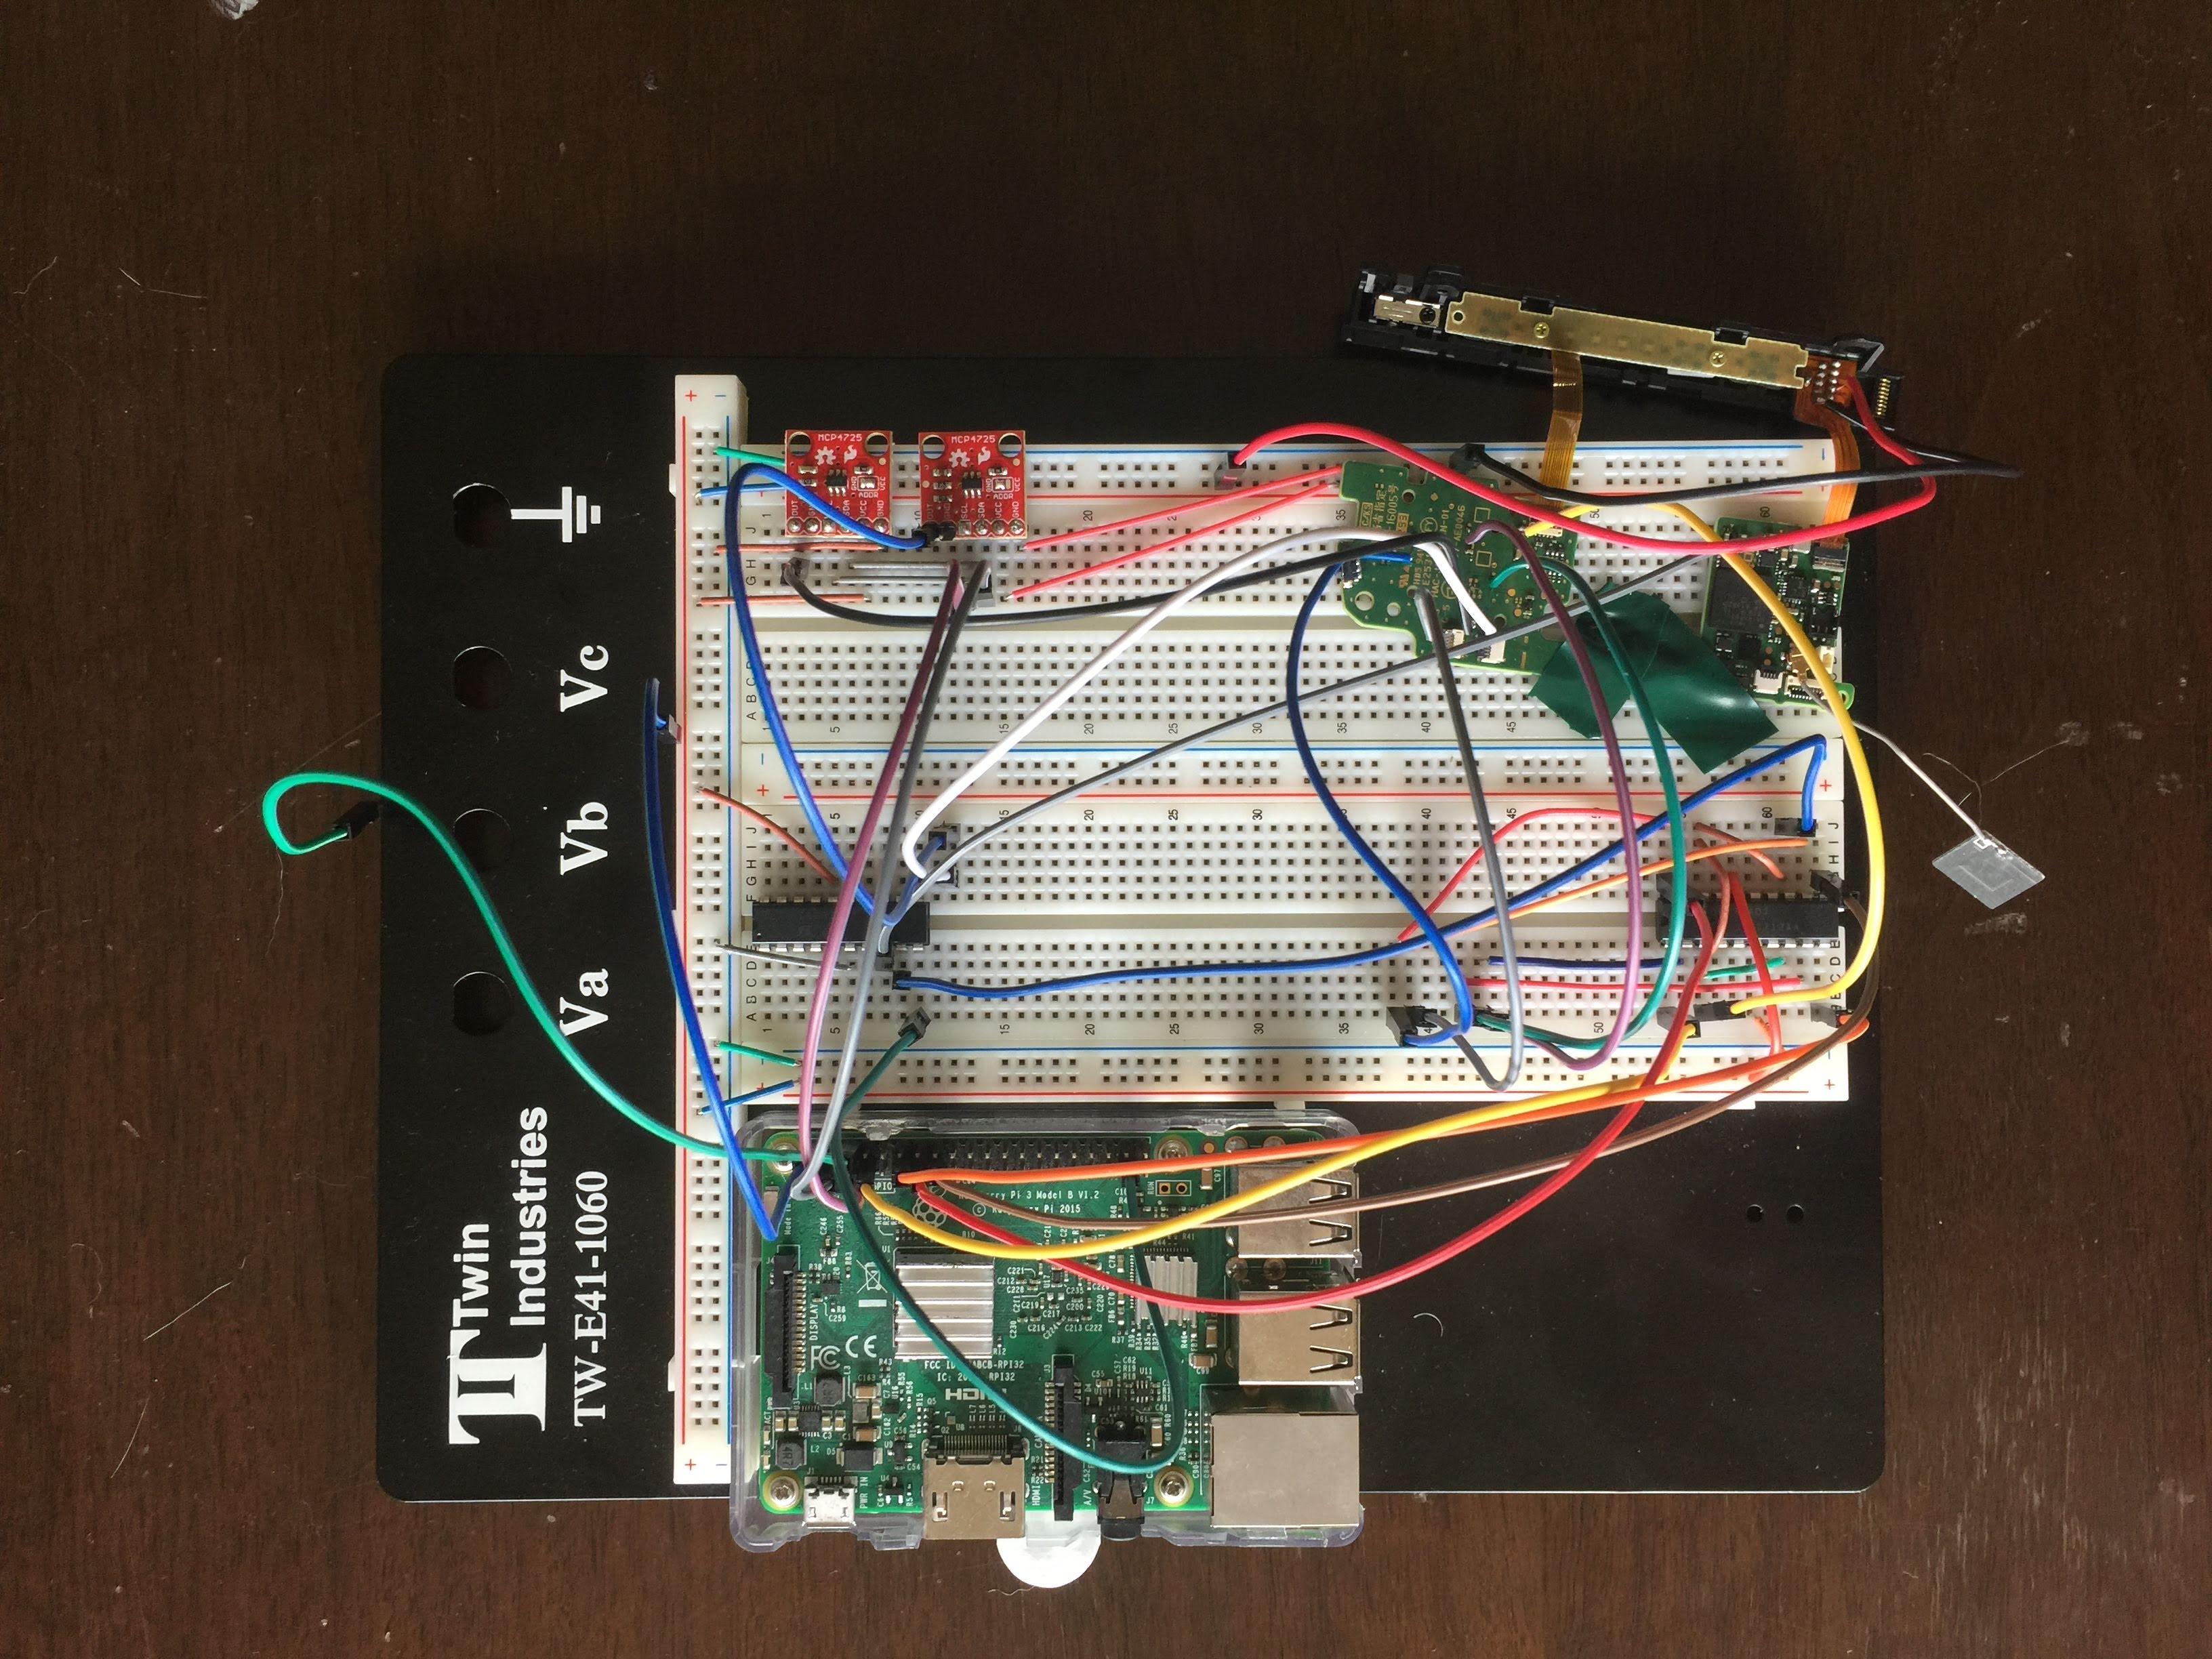 breadboard for the project